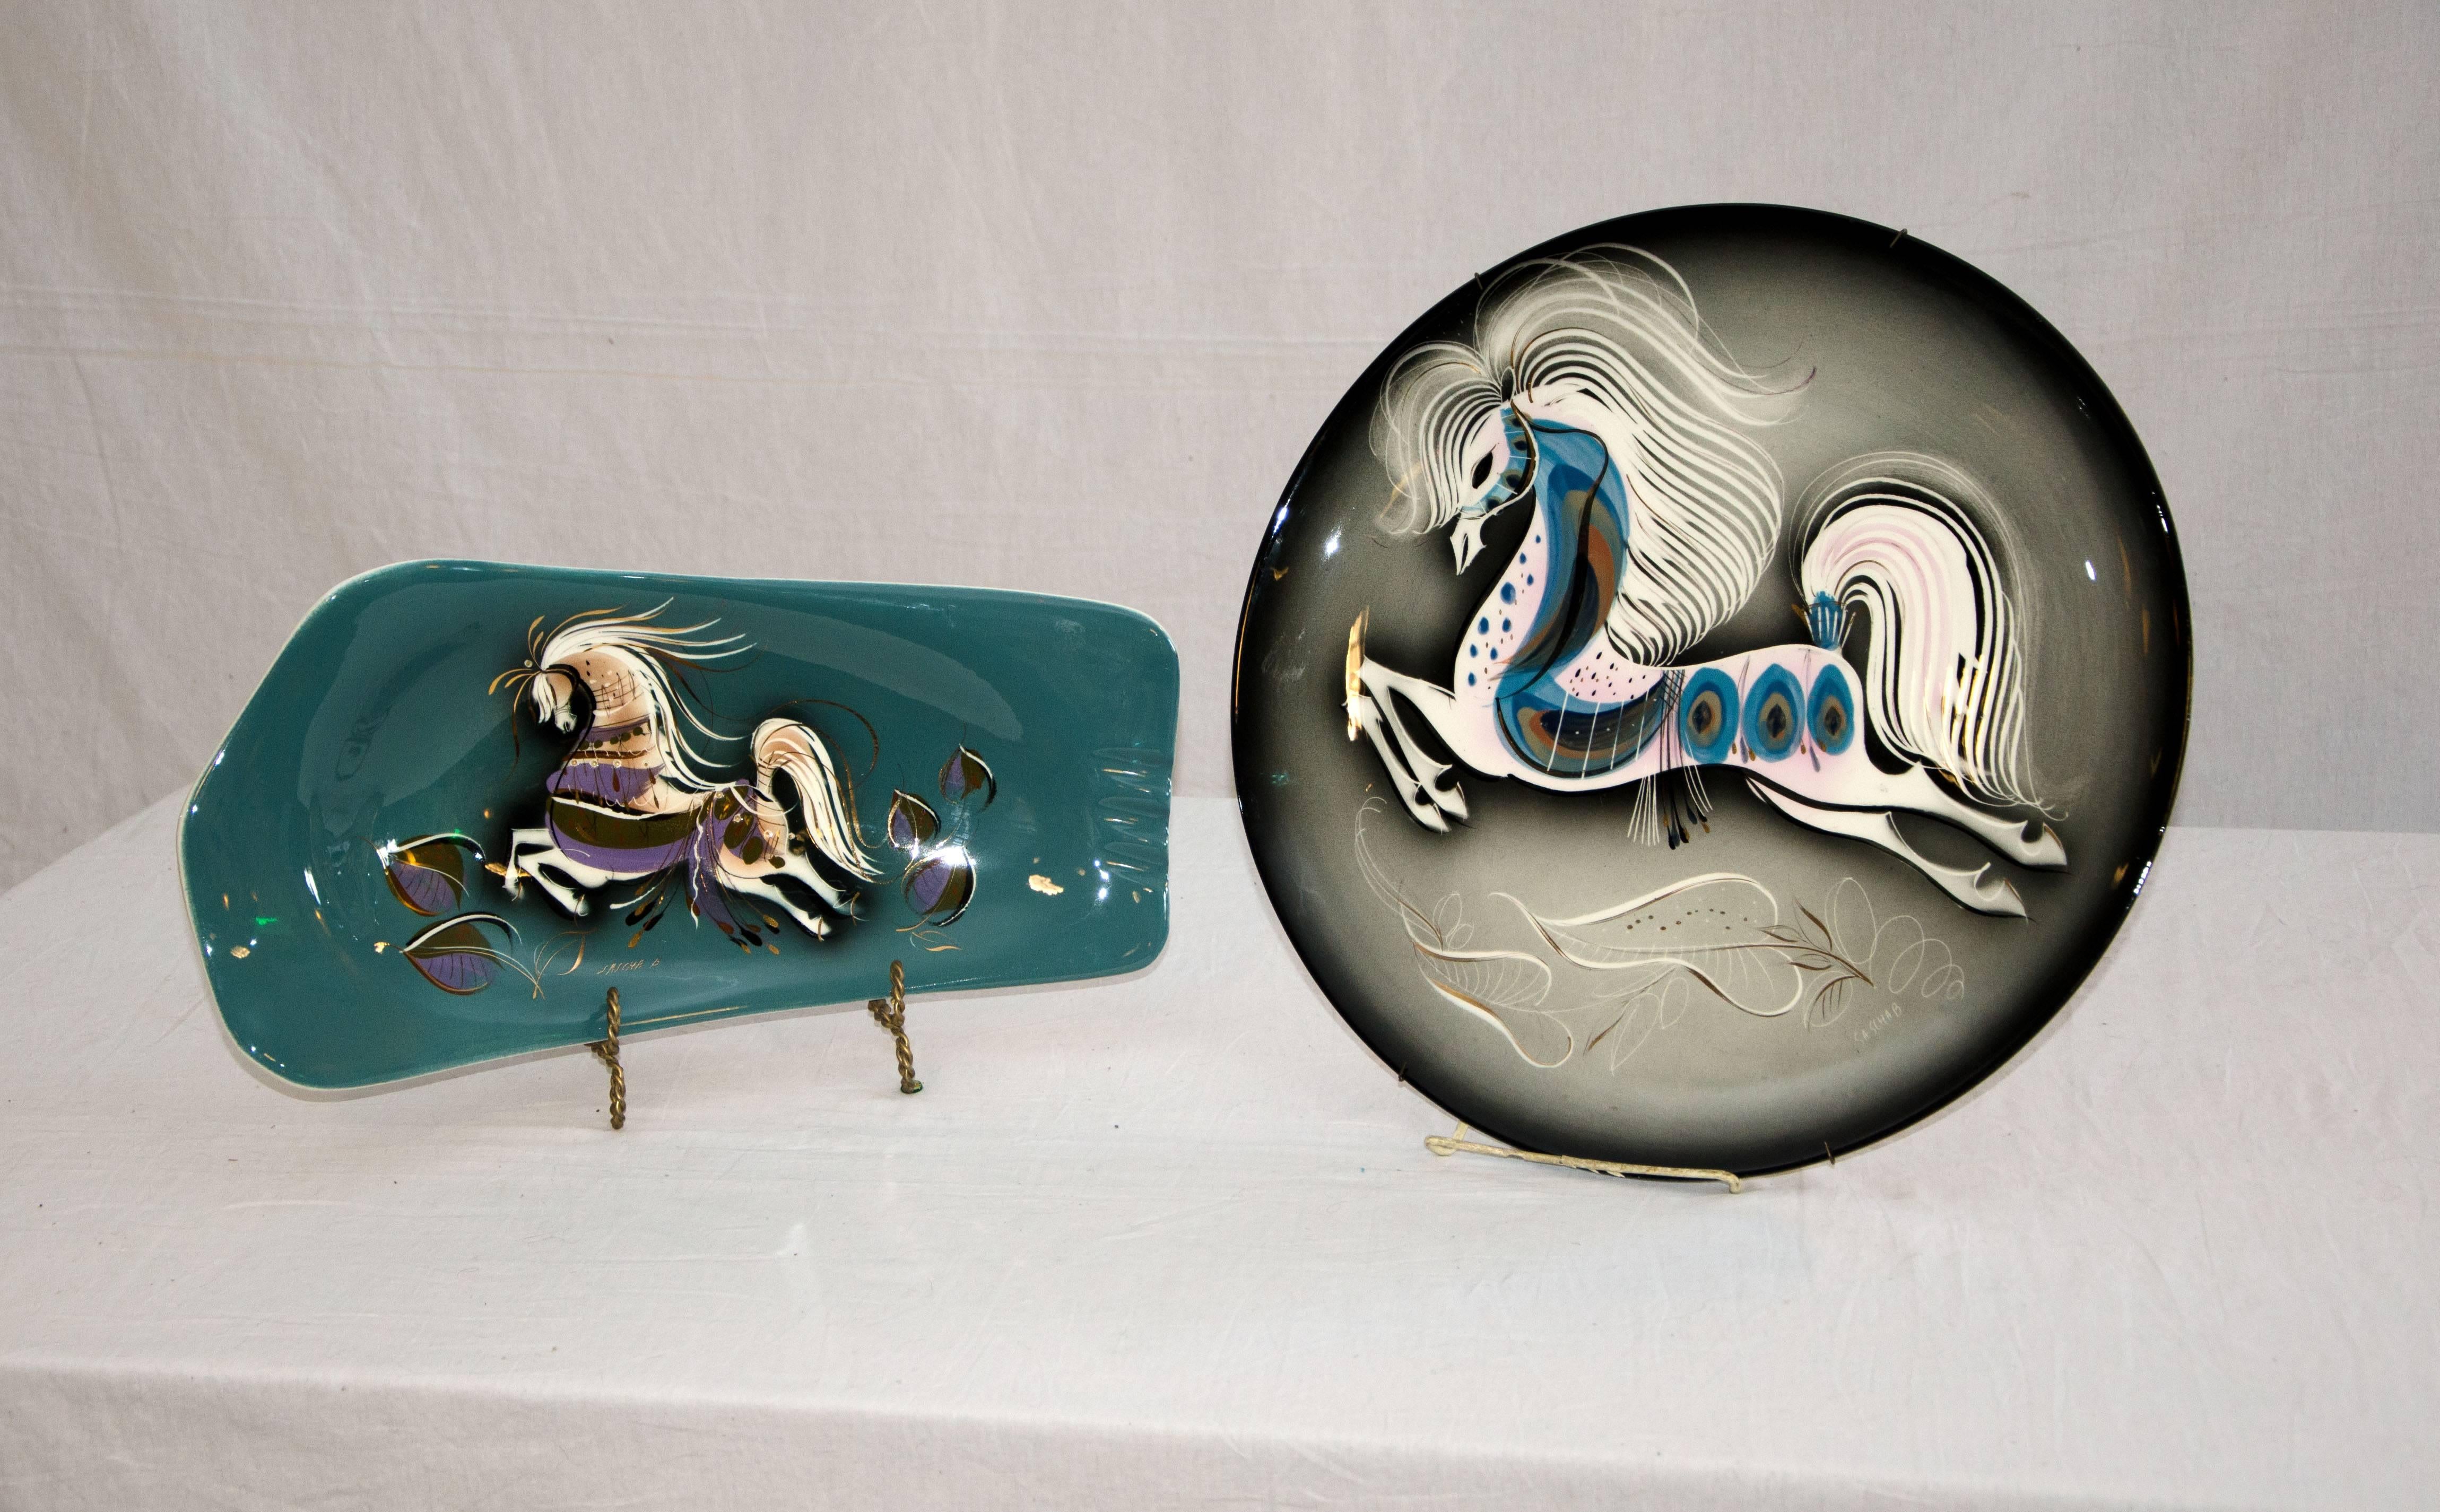 Two large Sascha Brastoff items consisting of a cigar ashtray and a wall hanging charger. Since smoking is not fashionable these days the cigar ashtray could be re-purposed as a serving dish for candy or other sweets or whatever is in your